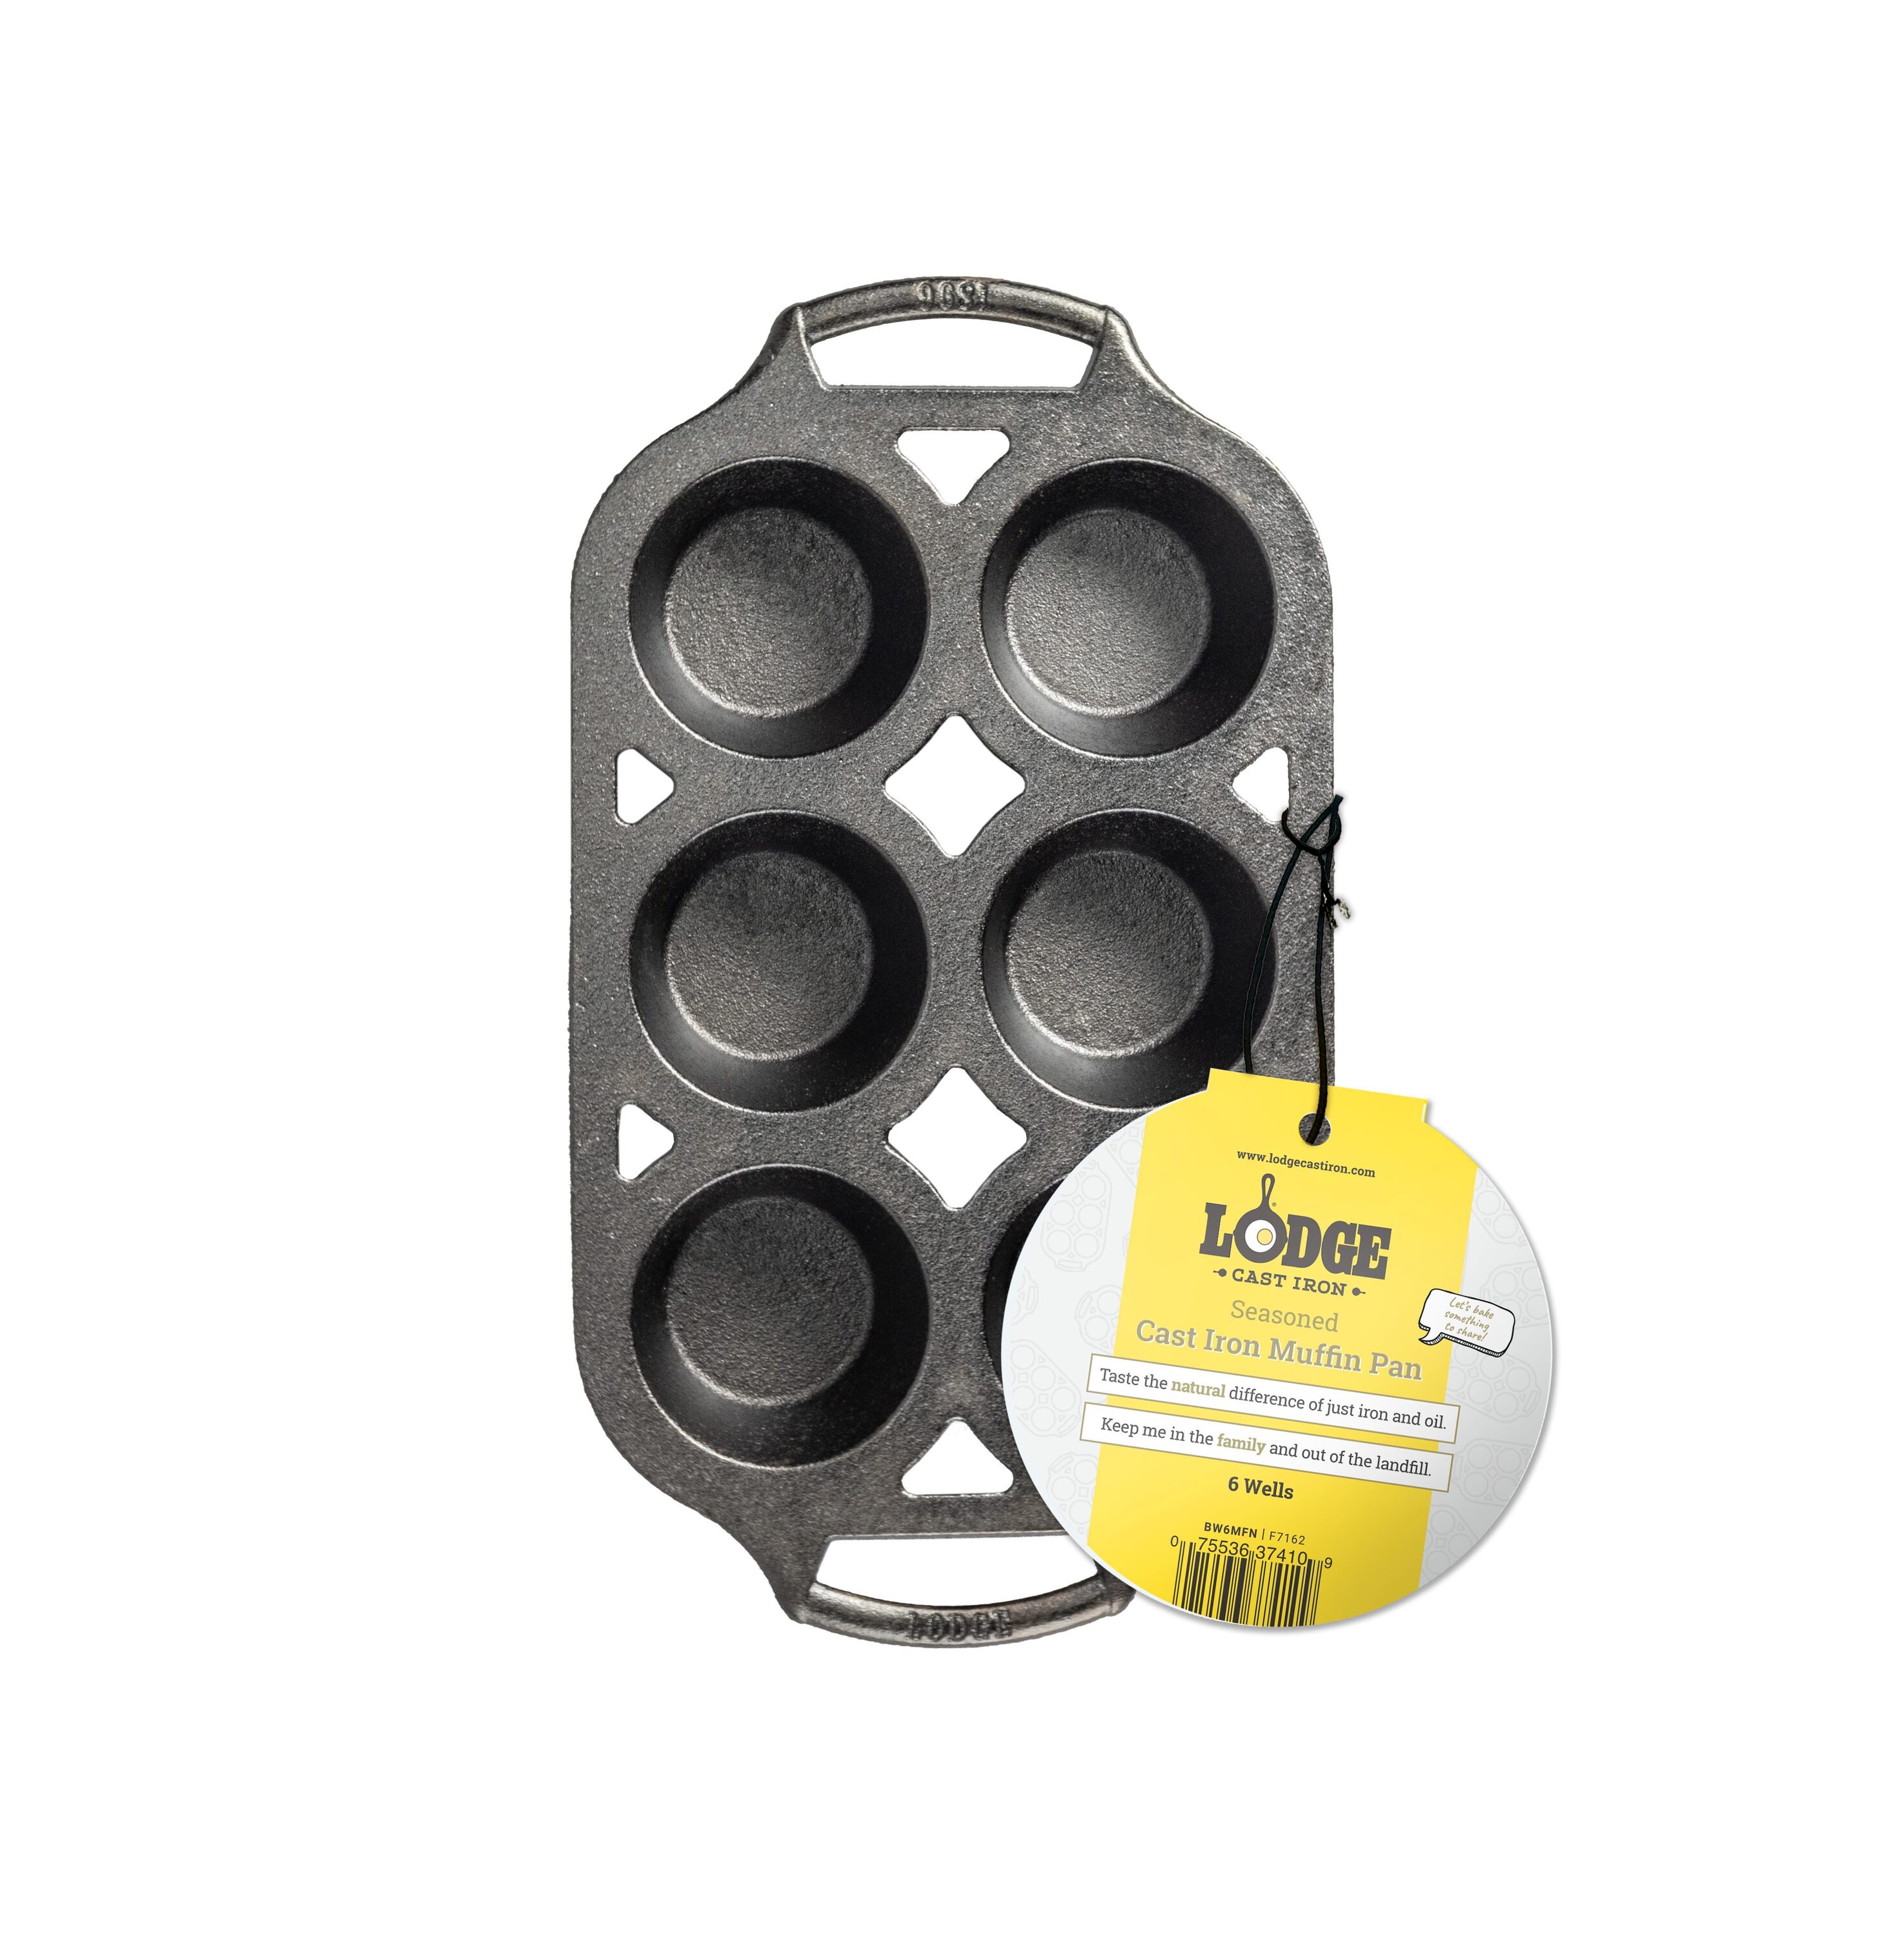 Sunnydaze Decor Pre-Seasoned Black Cast Iron Popover Cupcake Drop Biscuit  Muffin and Mini Cake Pan - Heavy Duty Indoor or Outdoor Camping Cookware in  the Bakeware department at